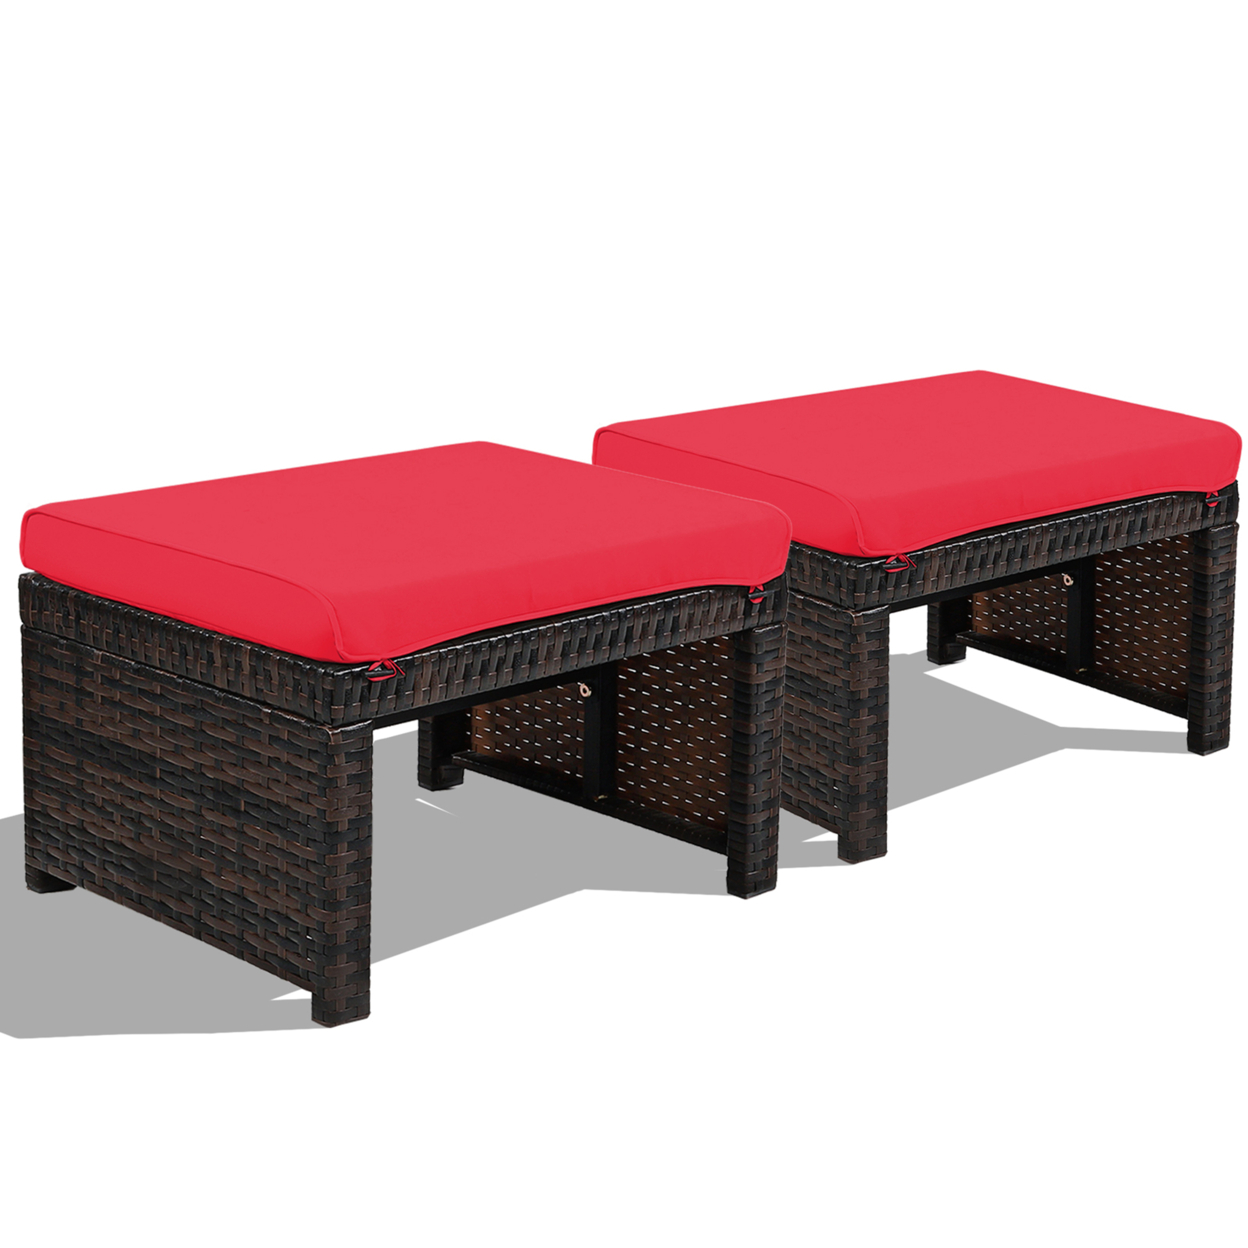 Set Of 2 Rattan Ottoman Footrest Footstool Patio Furniture W/ Cushion - Red